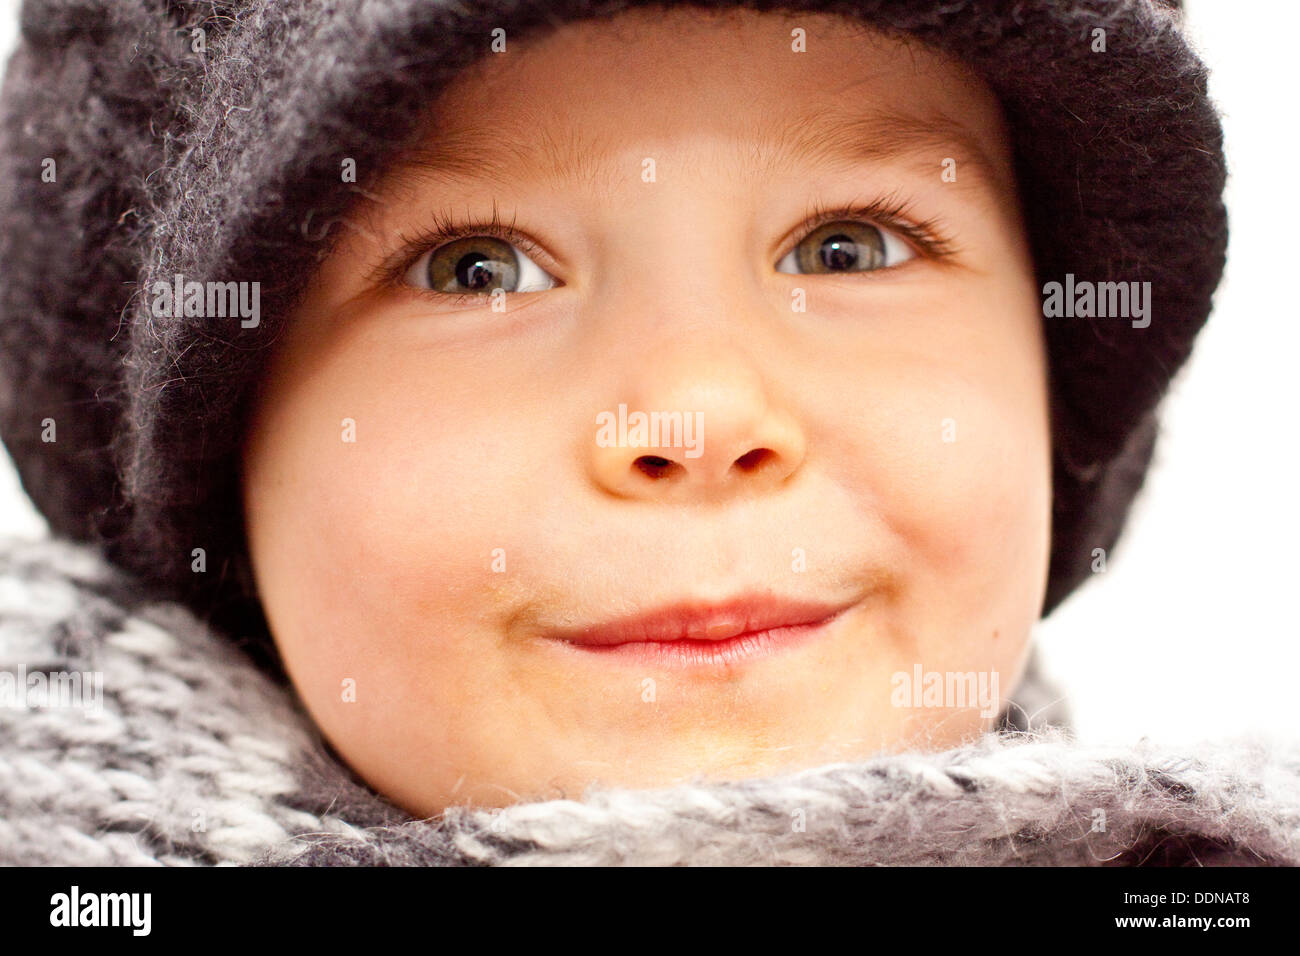 Toddler wearing wooly hat and scarf Stock Photo